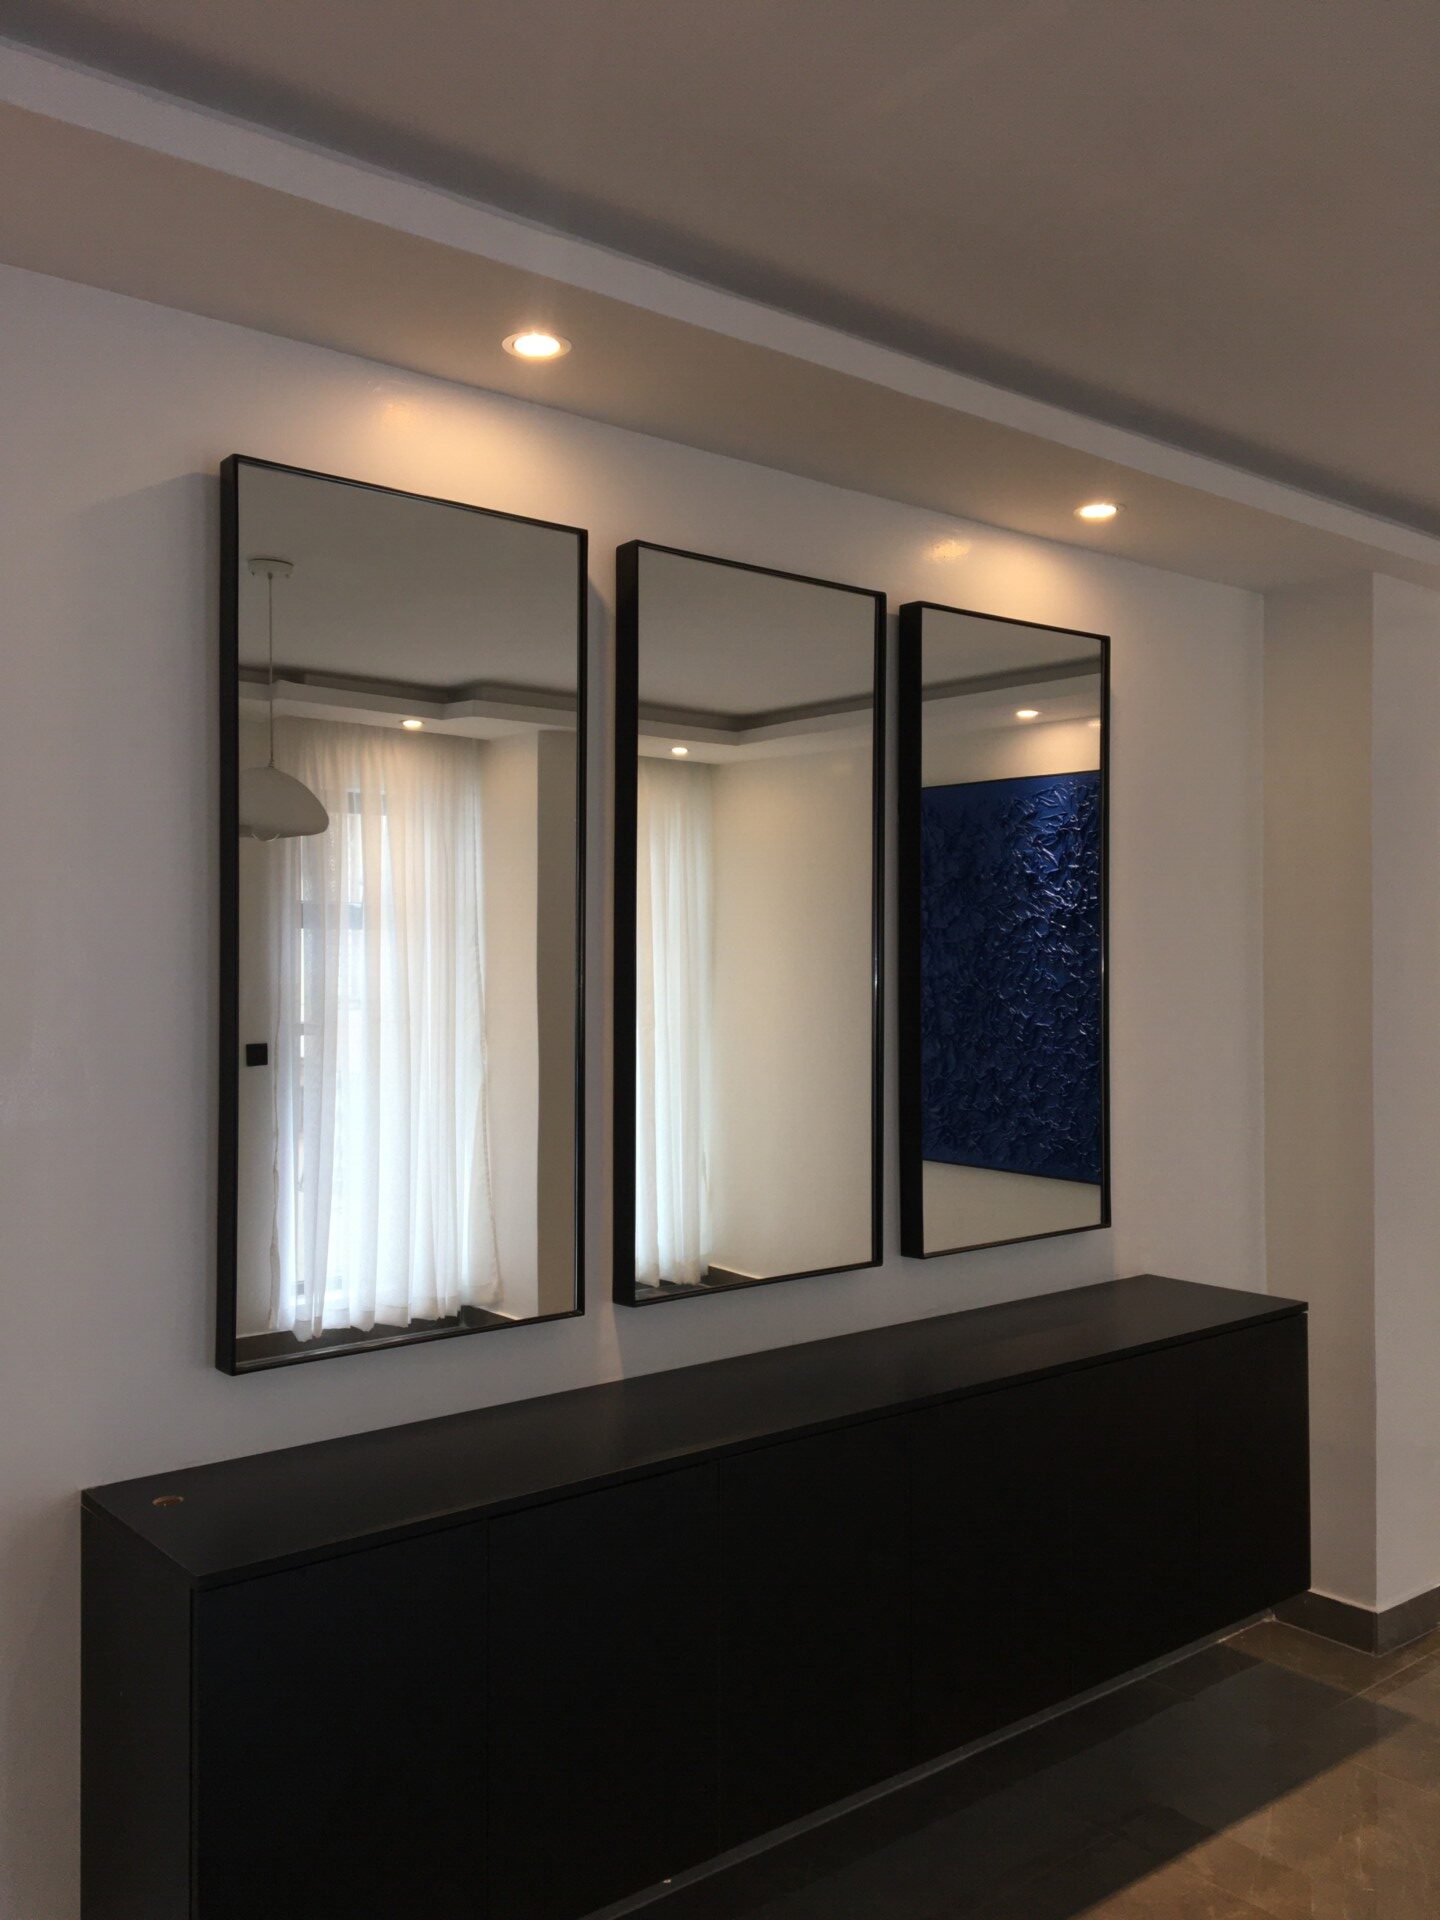 Modern, sleek mirror with a minimalist frame, reflecting a softly lit room, emphasizing contemporary interior design